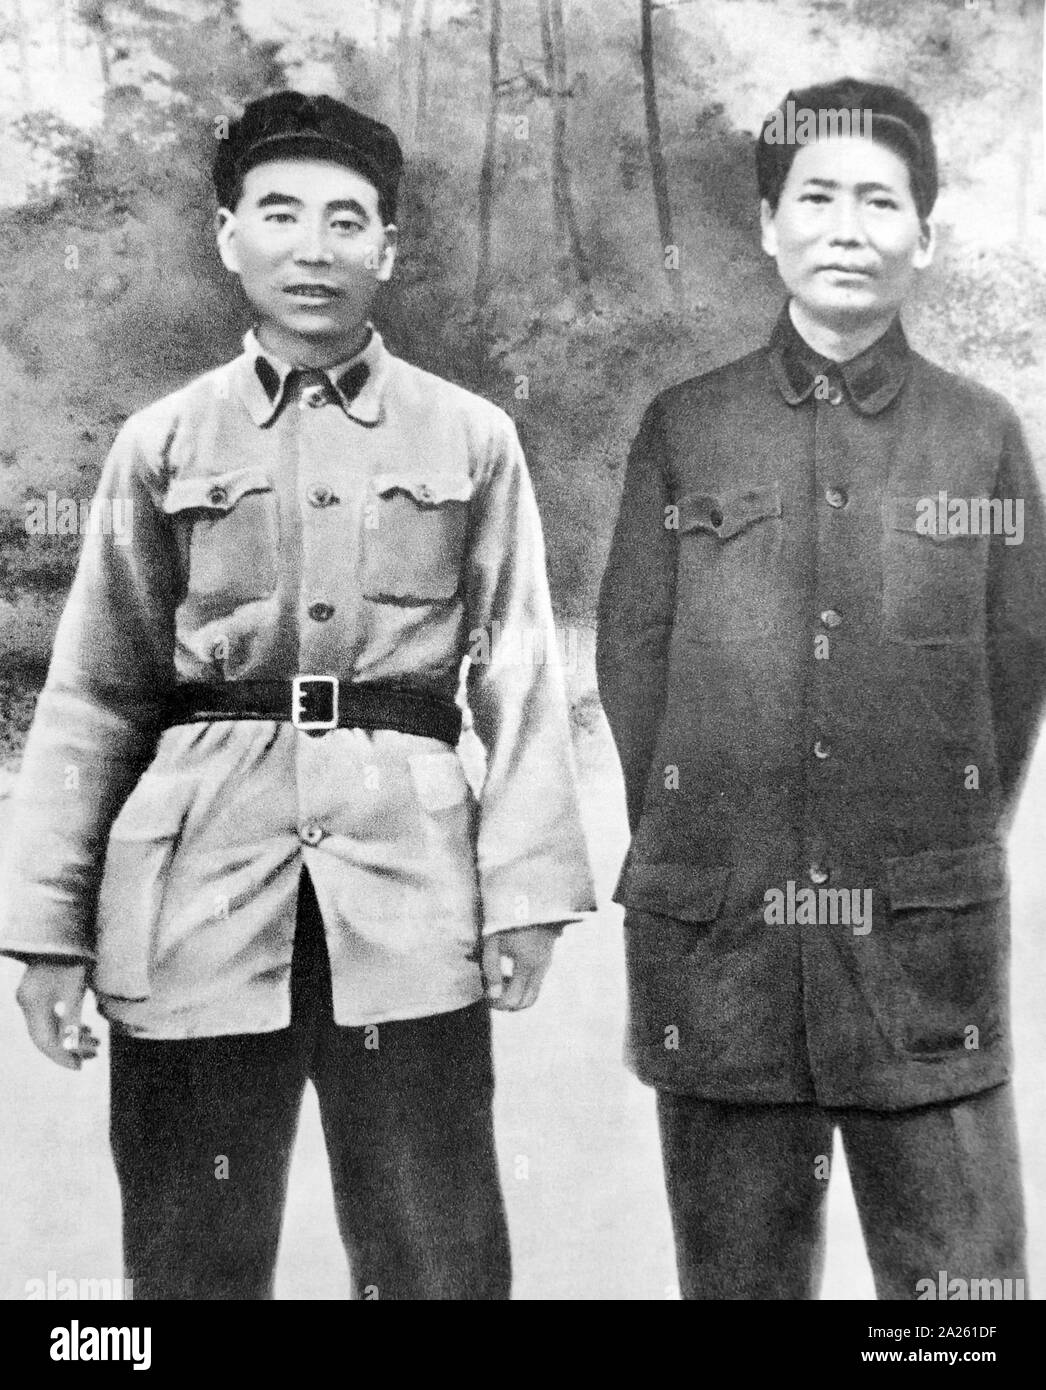 Lin Biao (left) standing with Nie Rongzhen, before an enemy plane seized in the Battle of Zhangzhou 1934. Lin Biao (1907 - 1971). Lin became instrumental in creating the foundations for Mao Zedong's cult of personality, and was rewarded in the Cultural Revolution by being named Mao's designated successor. Lin died on September 13, 1971. Nie Rongzhen (1899 - 1992) was a prominent Chinese Communist military leader, and one of ten Marshals in the People's Liberation Army of China. Stock Photo